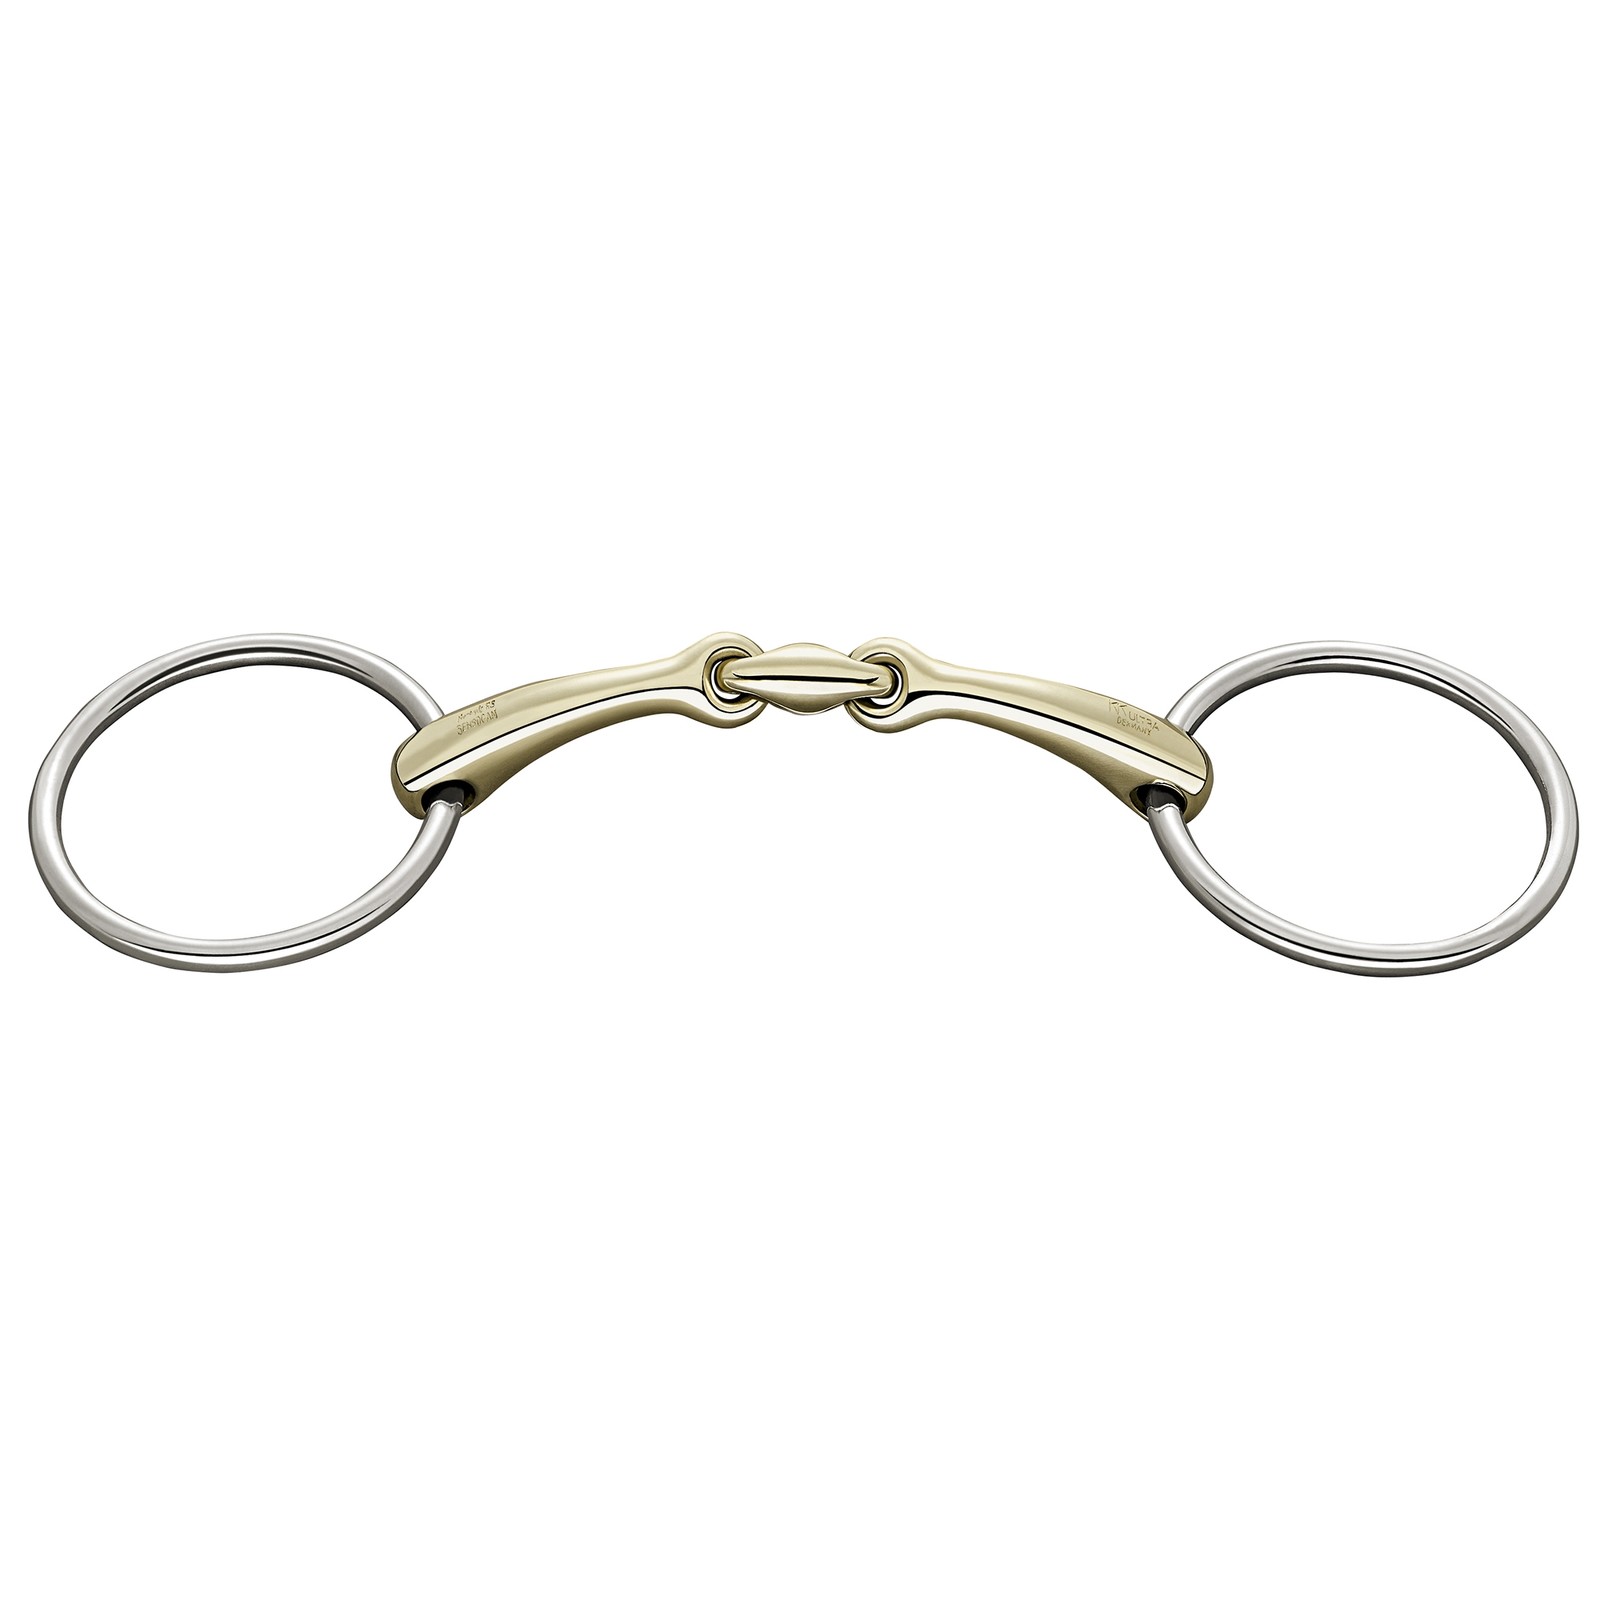 MAX-Control D-Ring Mors Cheval Double Brisé SPRENGER 16 mm-Neuf